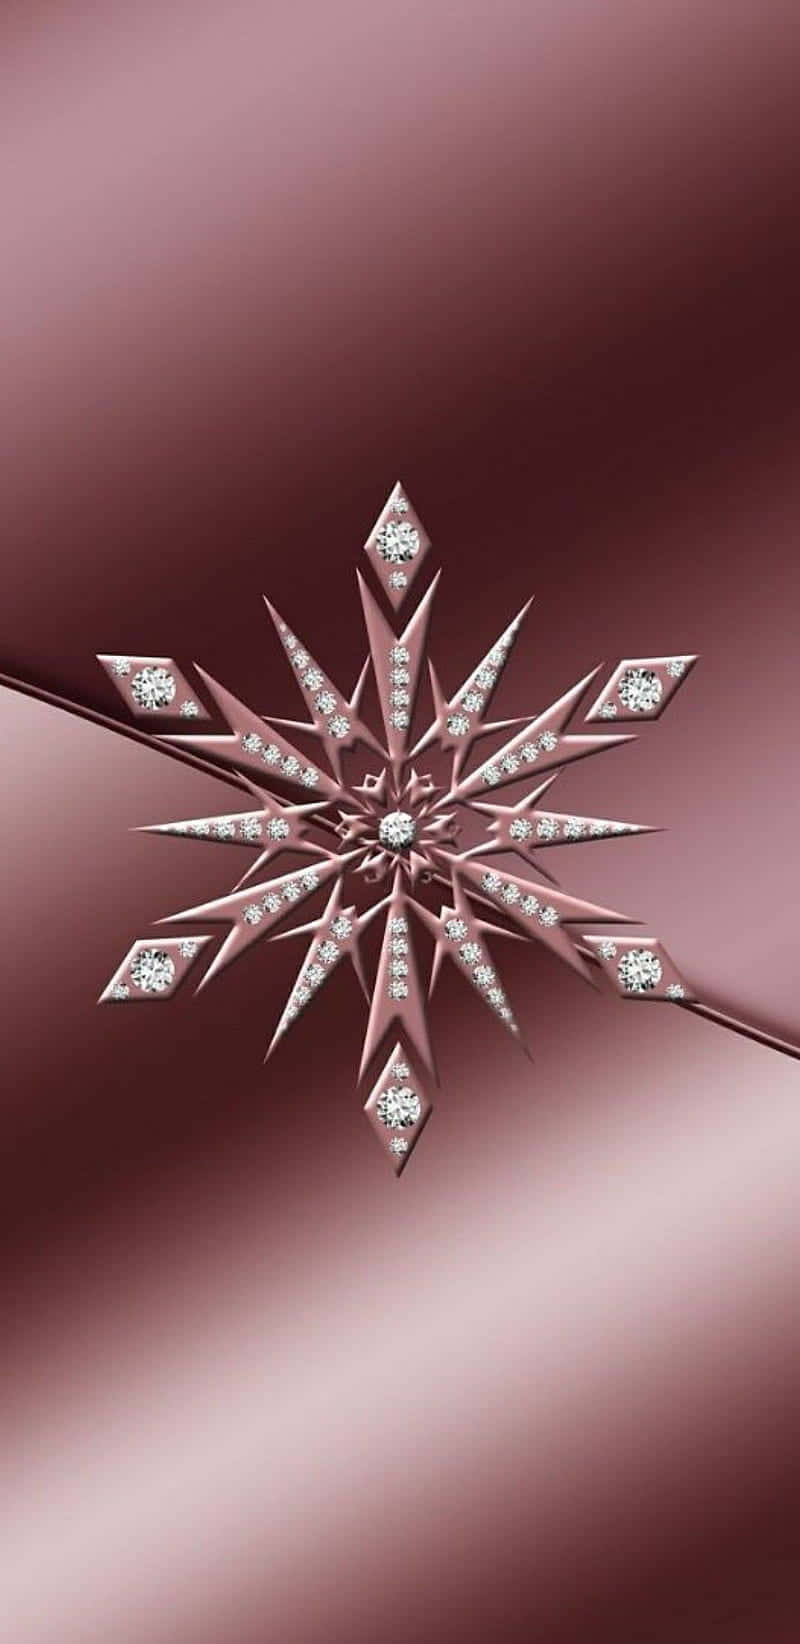 A Snowflake With Diamonds On A Pink Background Wallpaper